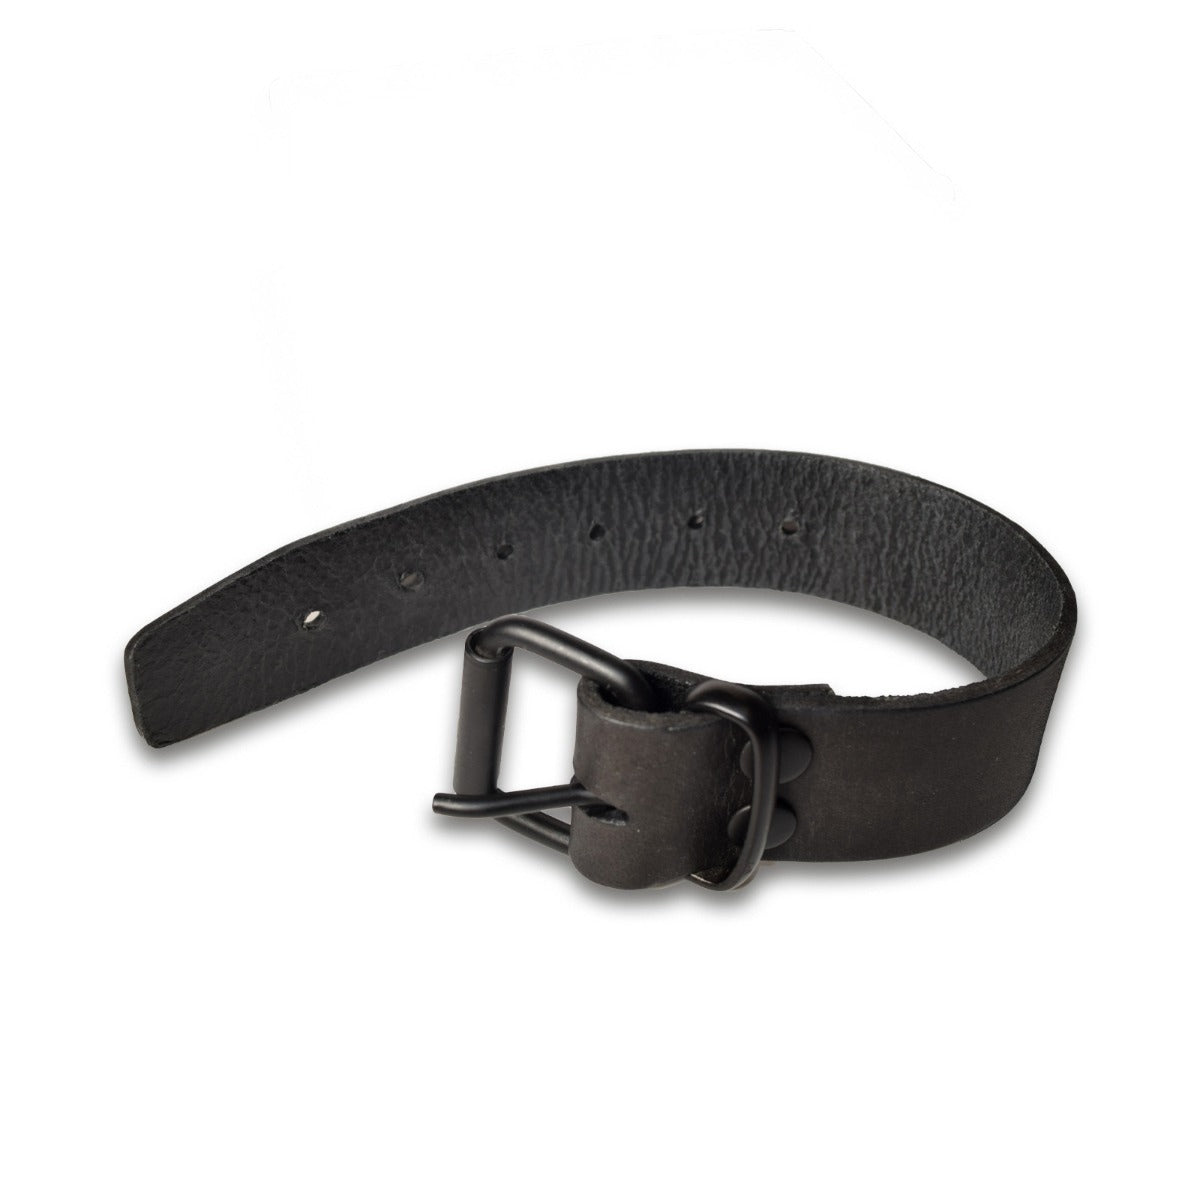 Prowler RED Leather Buckle Bicep Band Black Medium